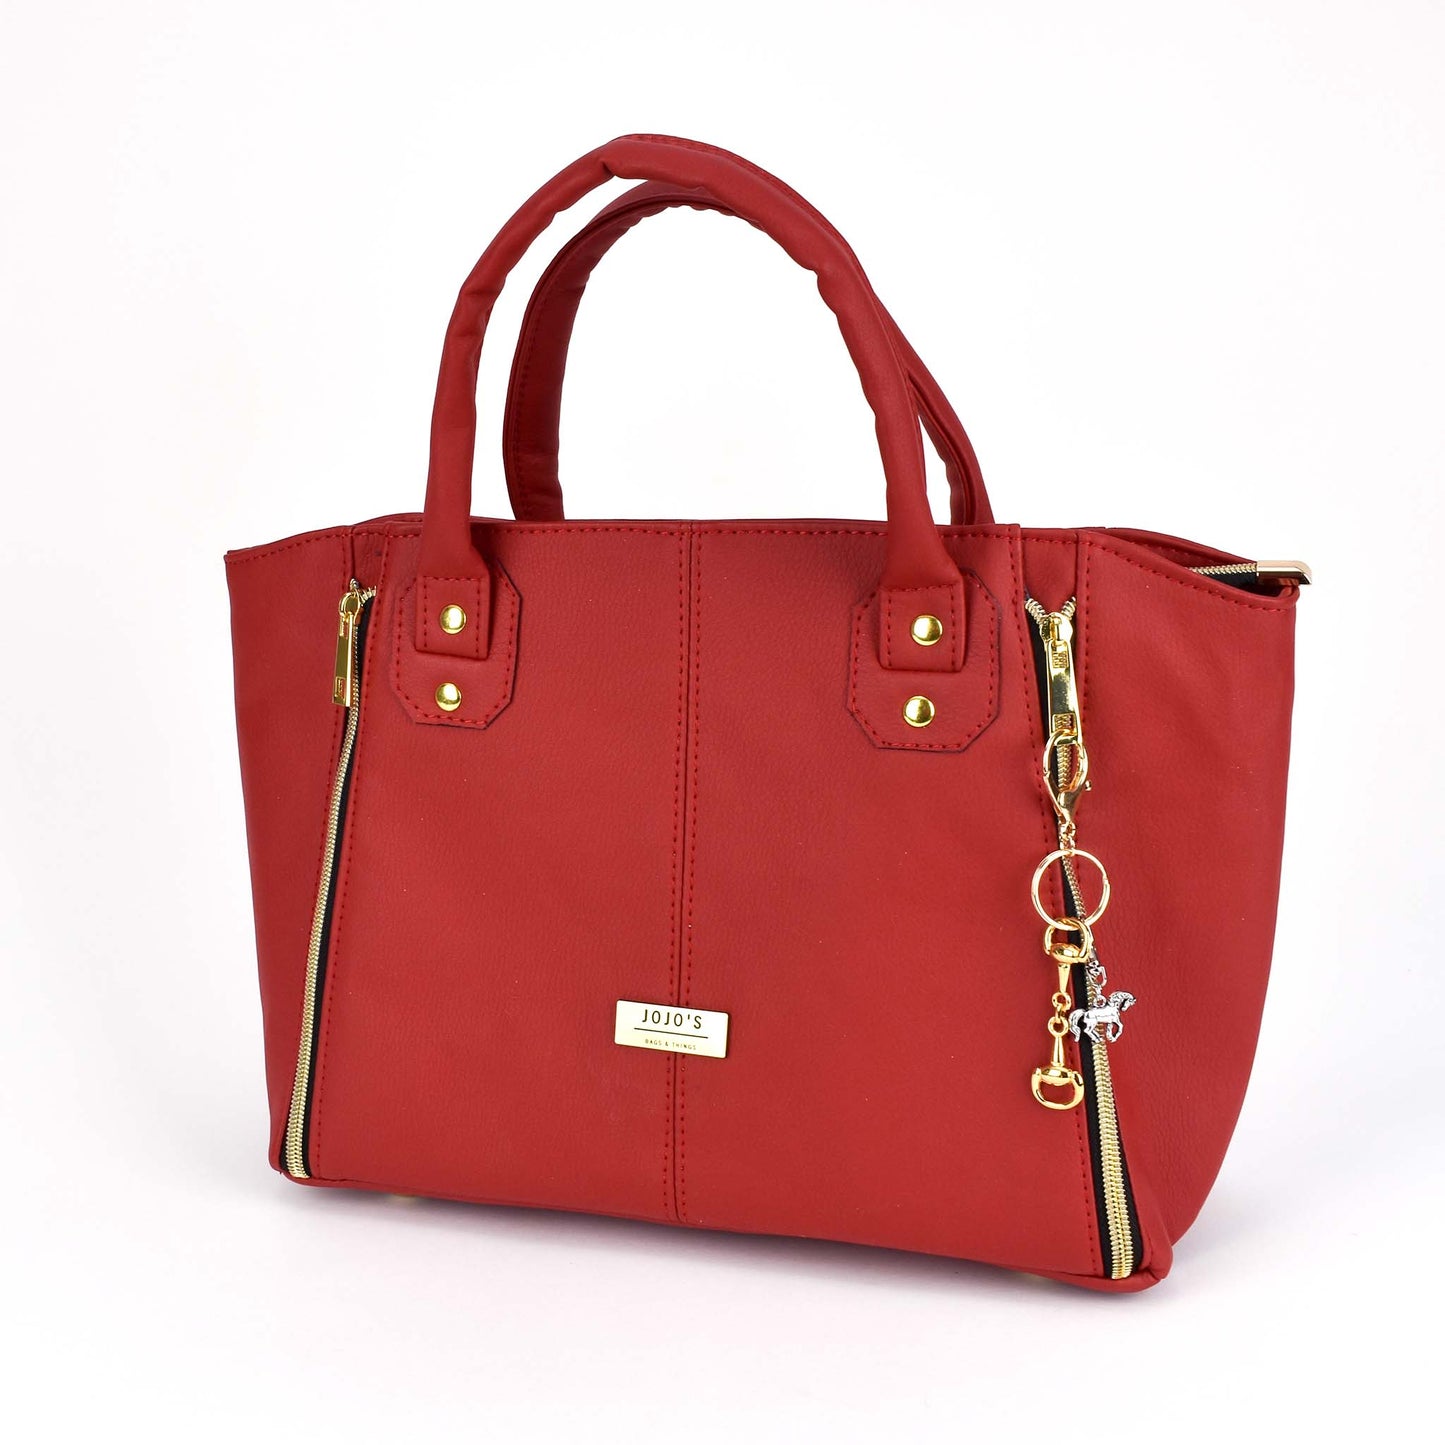 Rudeneja Red Faux Leather Purse